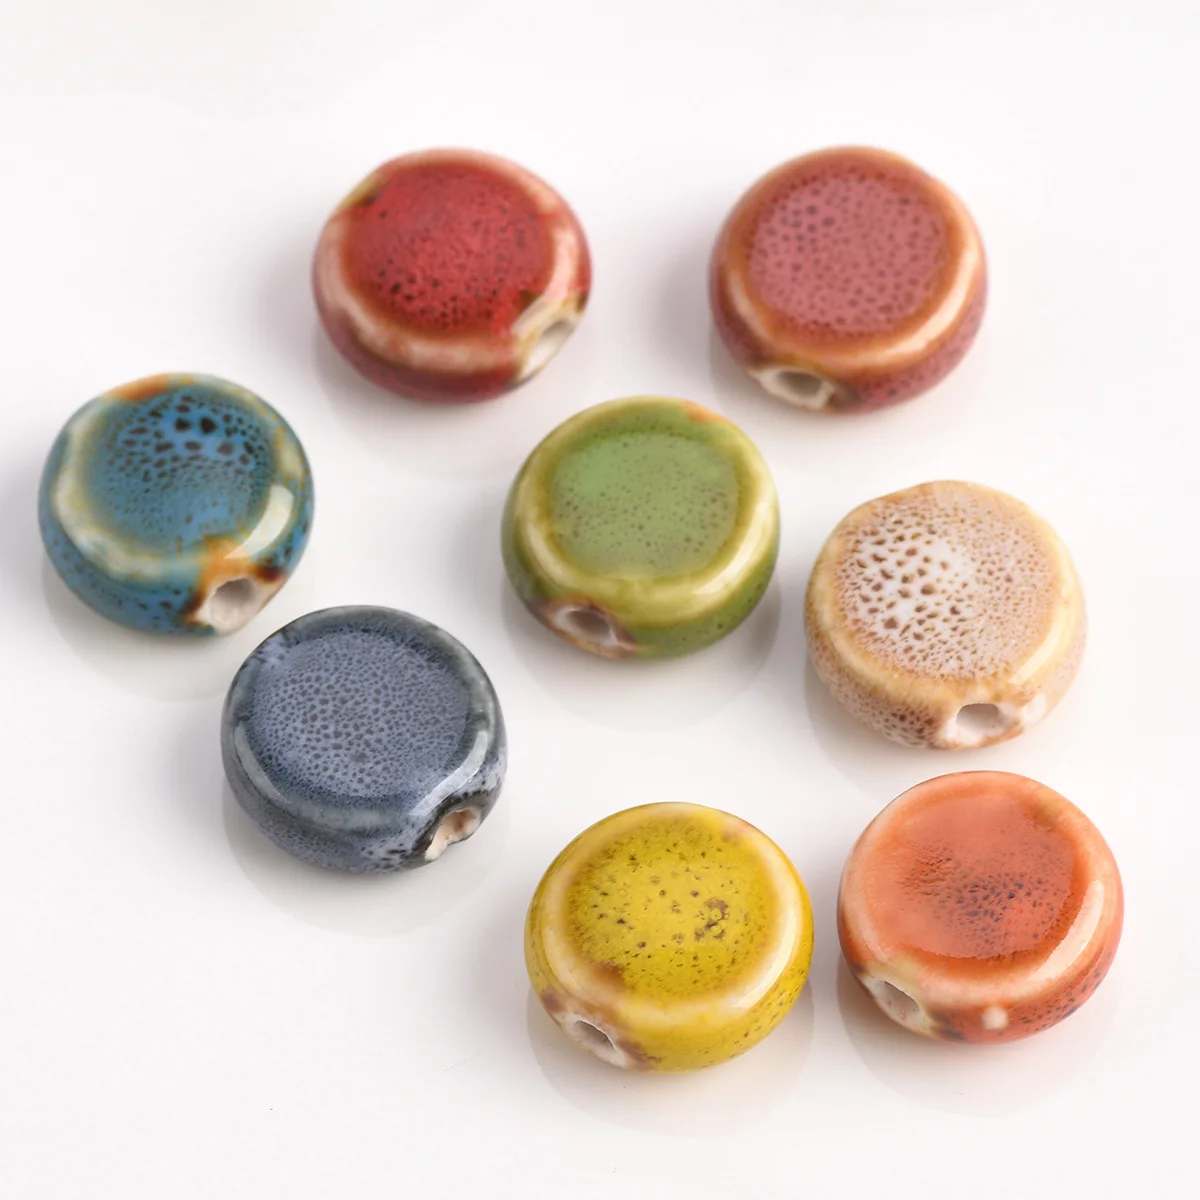 10pcs Flat Round 15mm Handmade Fancy Glaze Ceramic Porcelain Loose Spacer Beads Lot For Jewelry Making DIY Findings watercolors oval palette plum plate three line palette watercolor plate flat palette cardboard gouache imitation porcelain